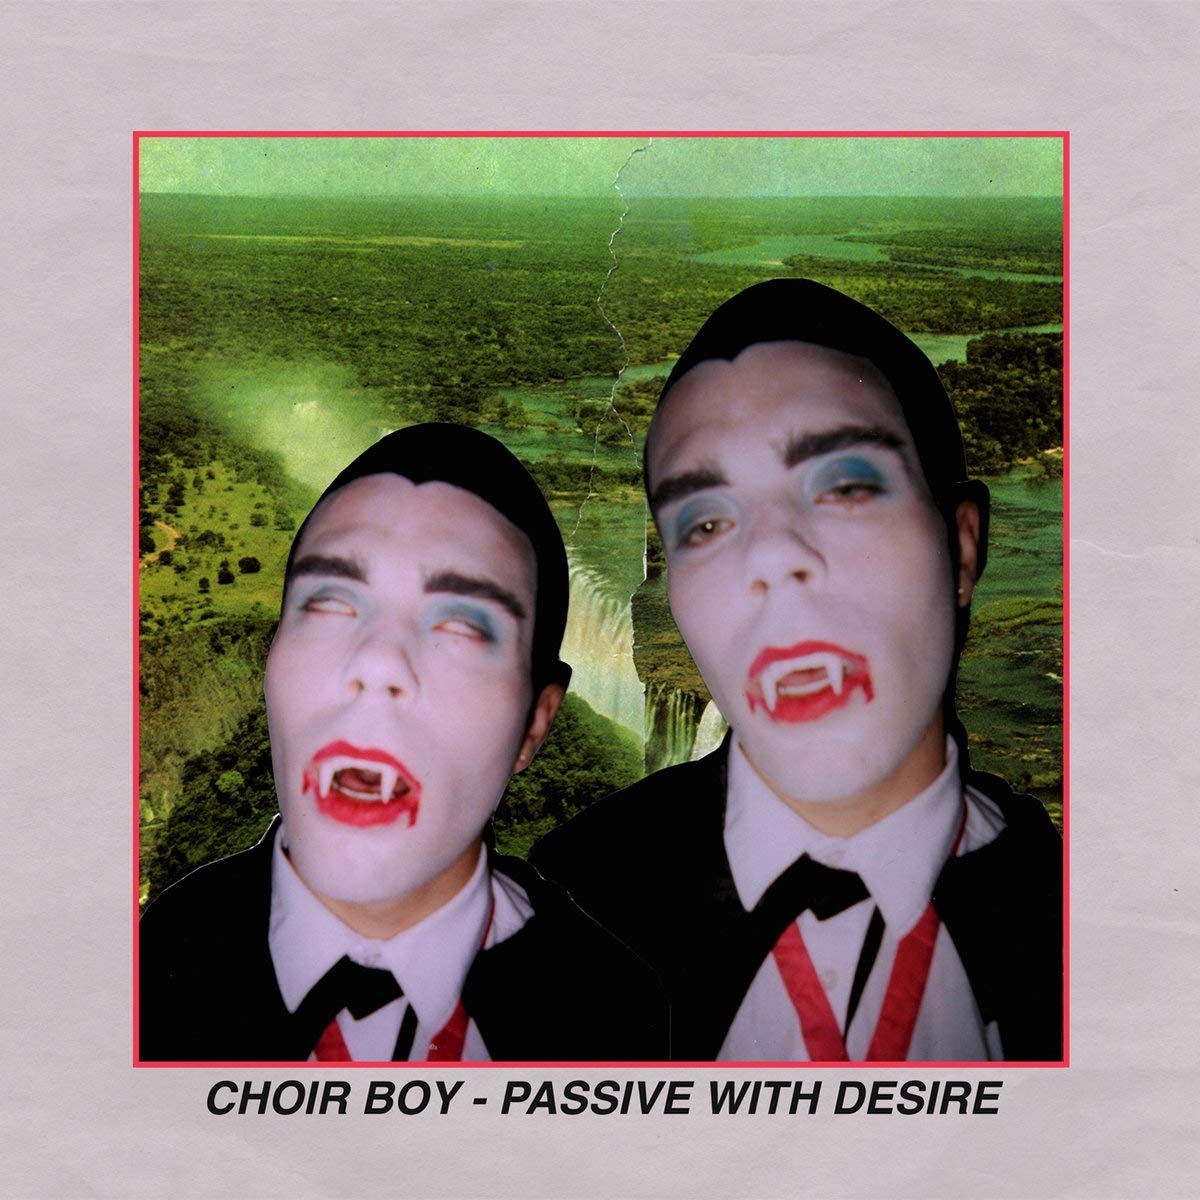 Choir Boy - Passive With Desire LP (Opaque Yellow Vinyl, Limited to 600)